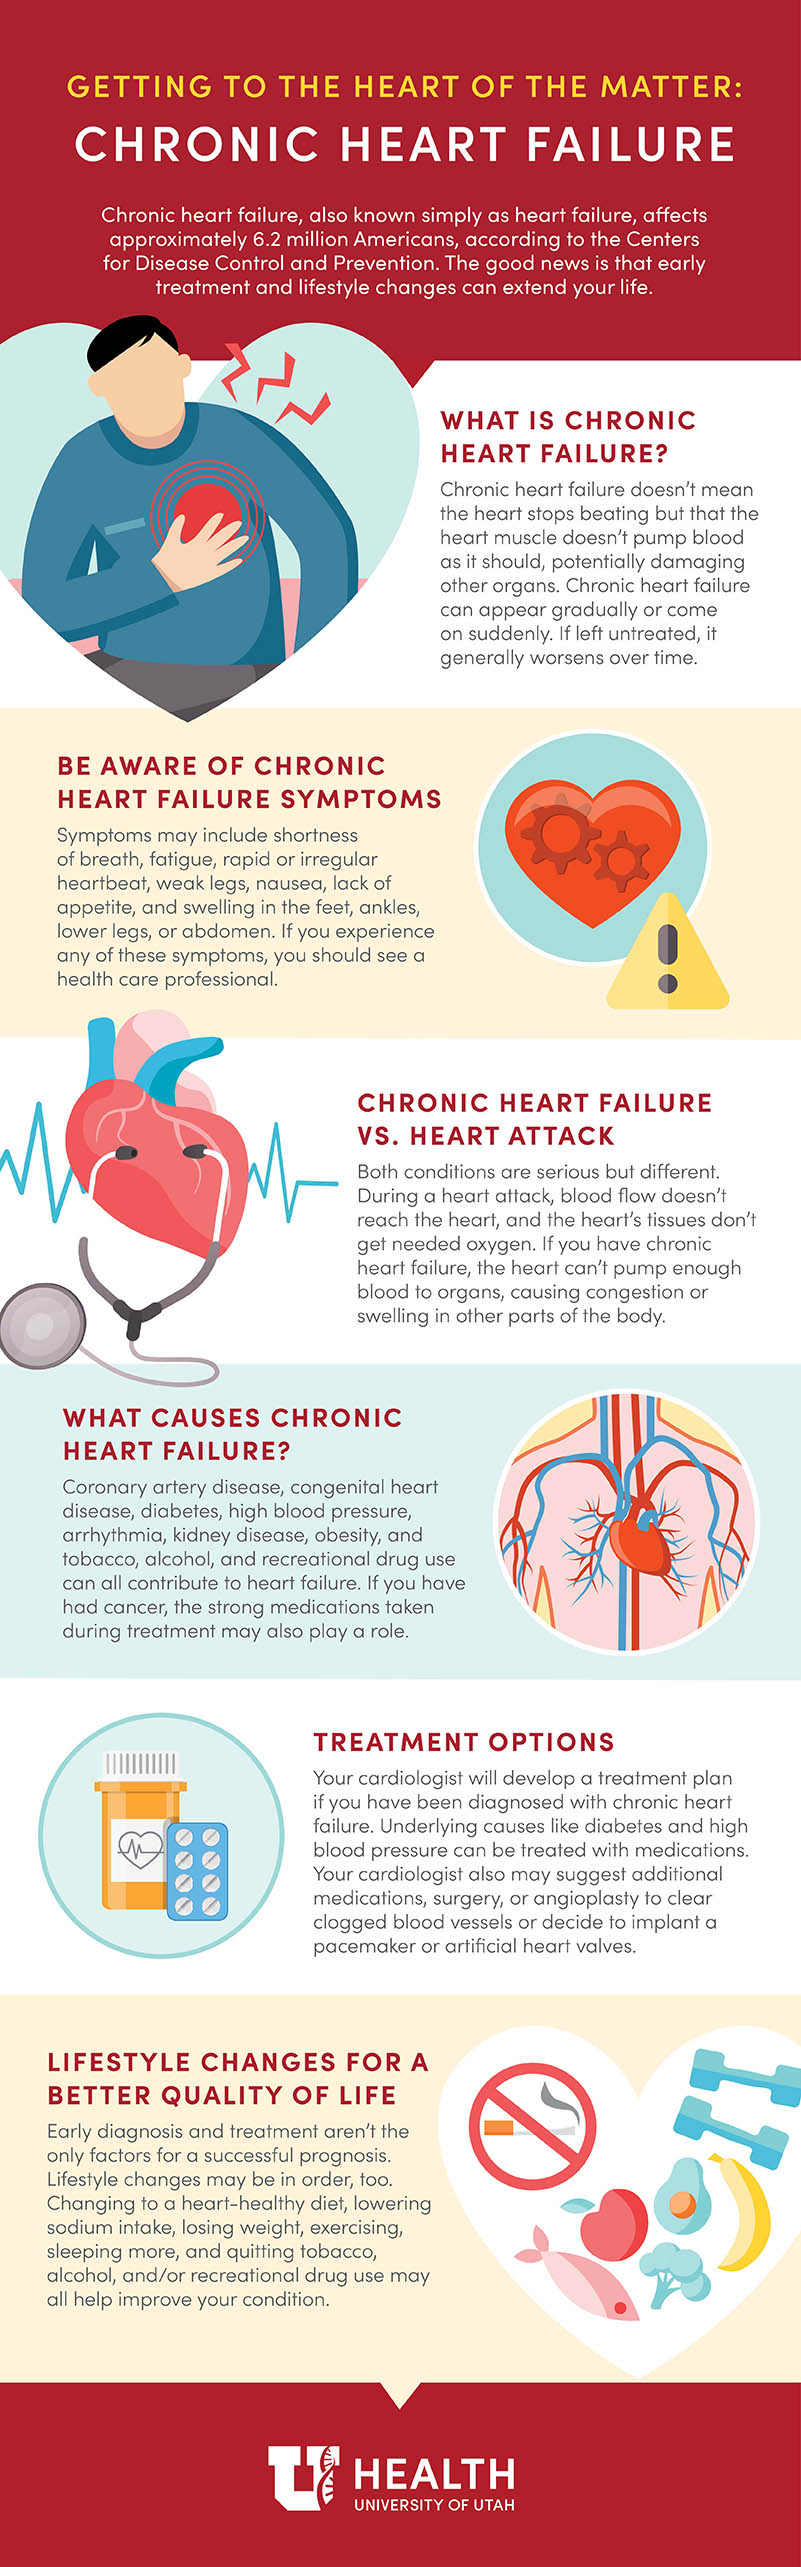 Infographic explains chronic heart failure including its symptoms, causes, and treatment options.